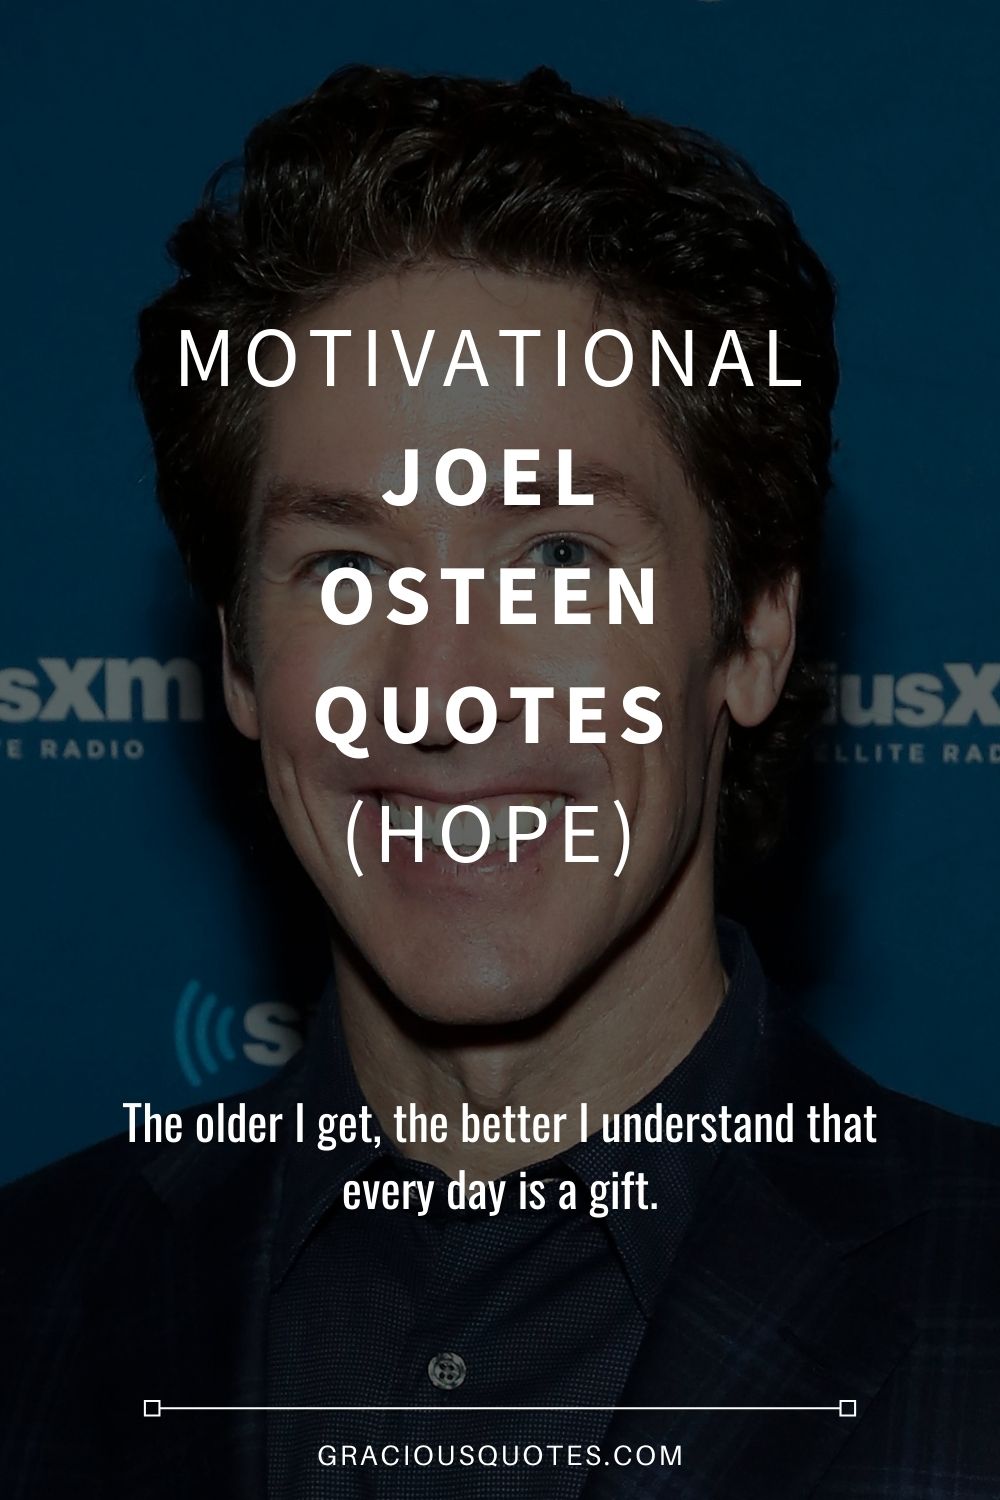 Motivational Joel Osteen Quotes (HOPE) - Gracious Quotes